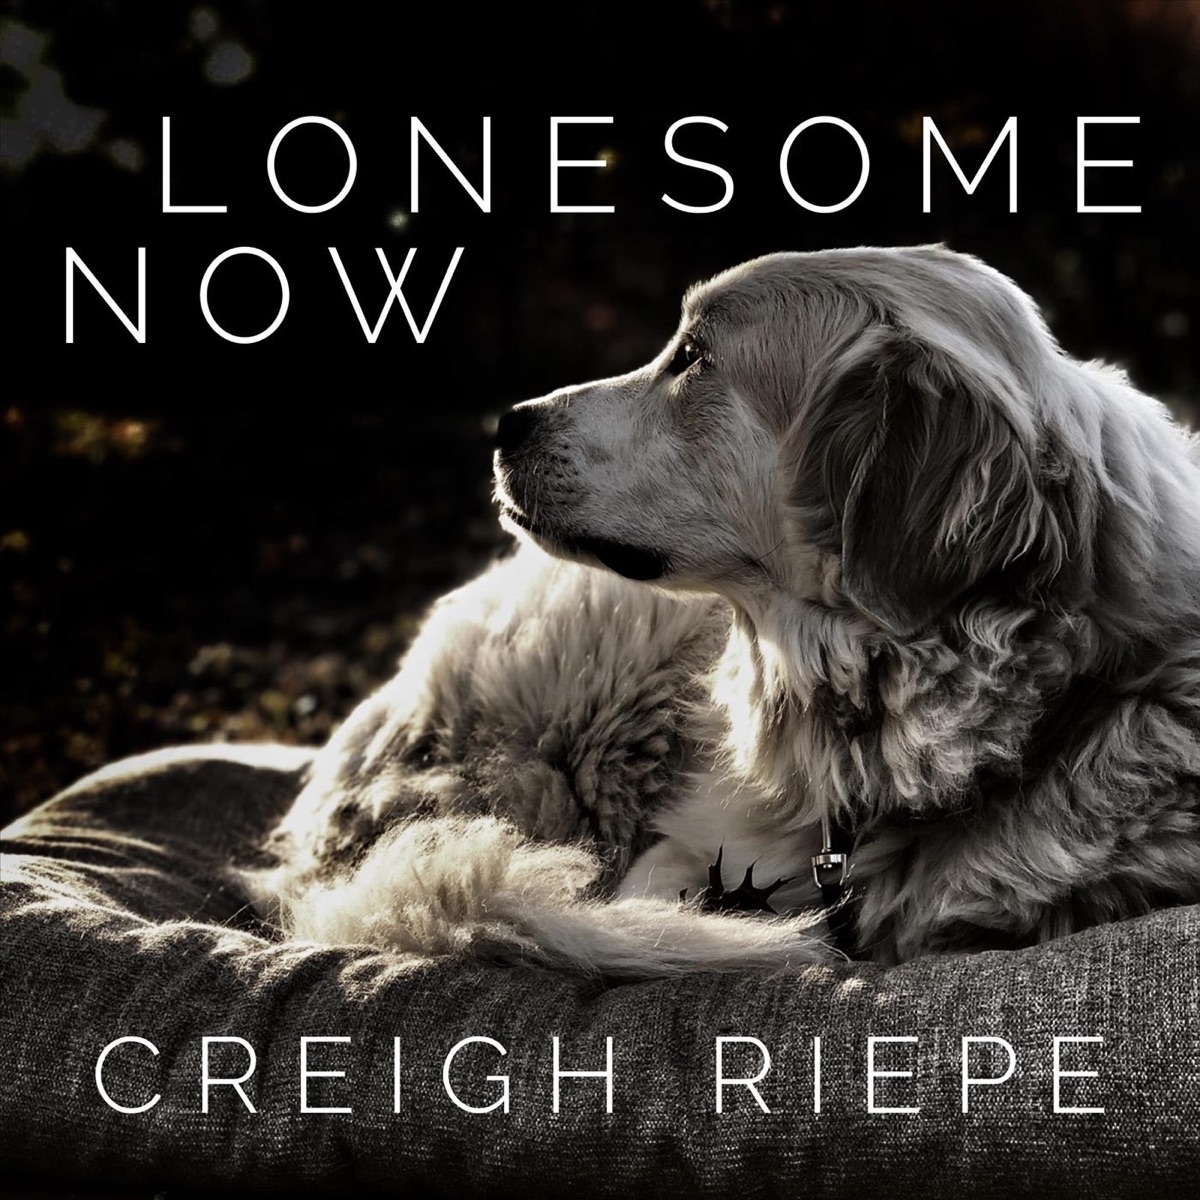 What Are You Doing Right Now? - Single - Album by Creigh Riepe